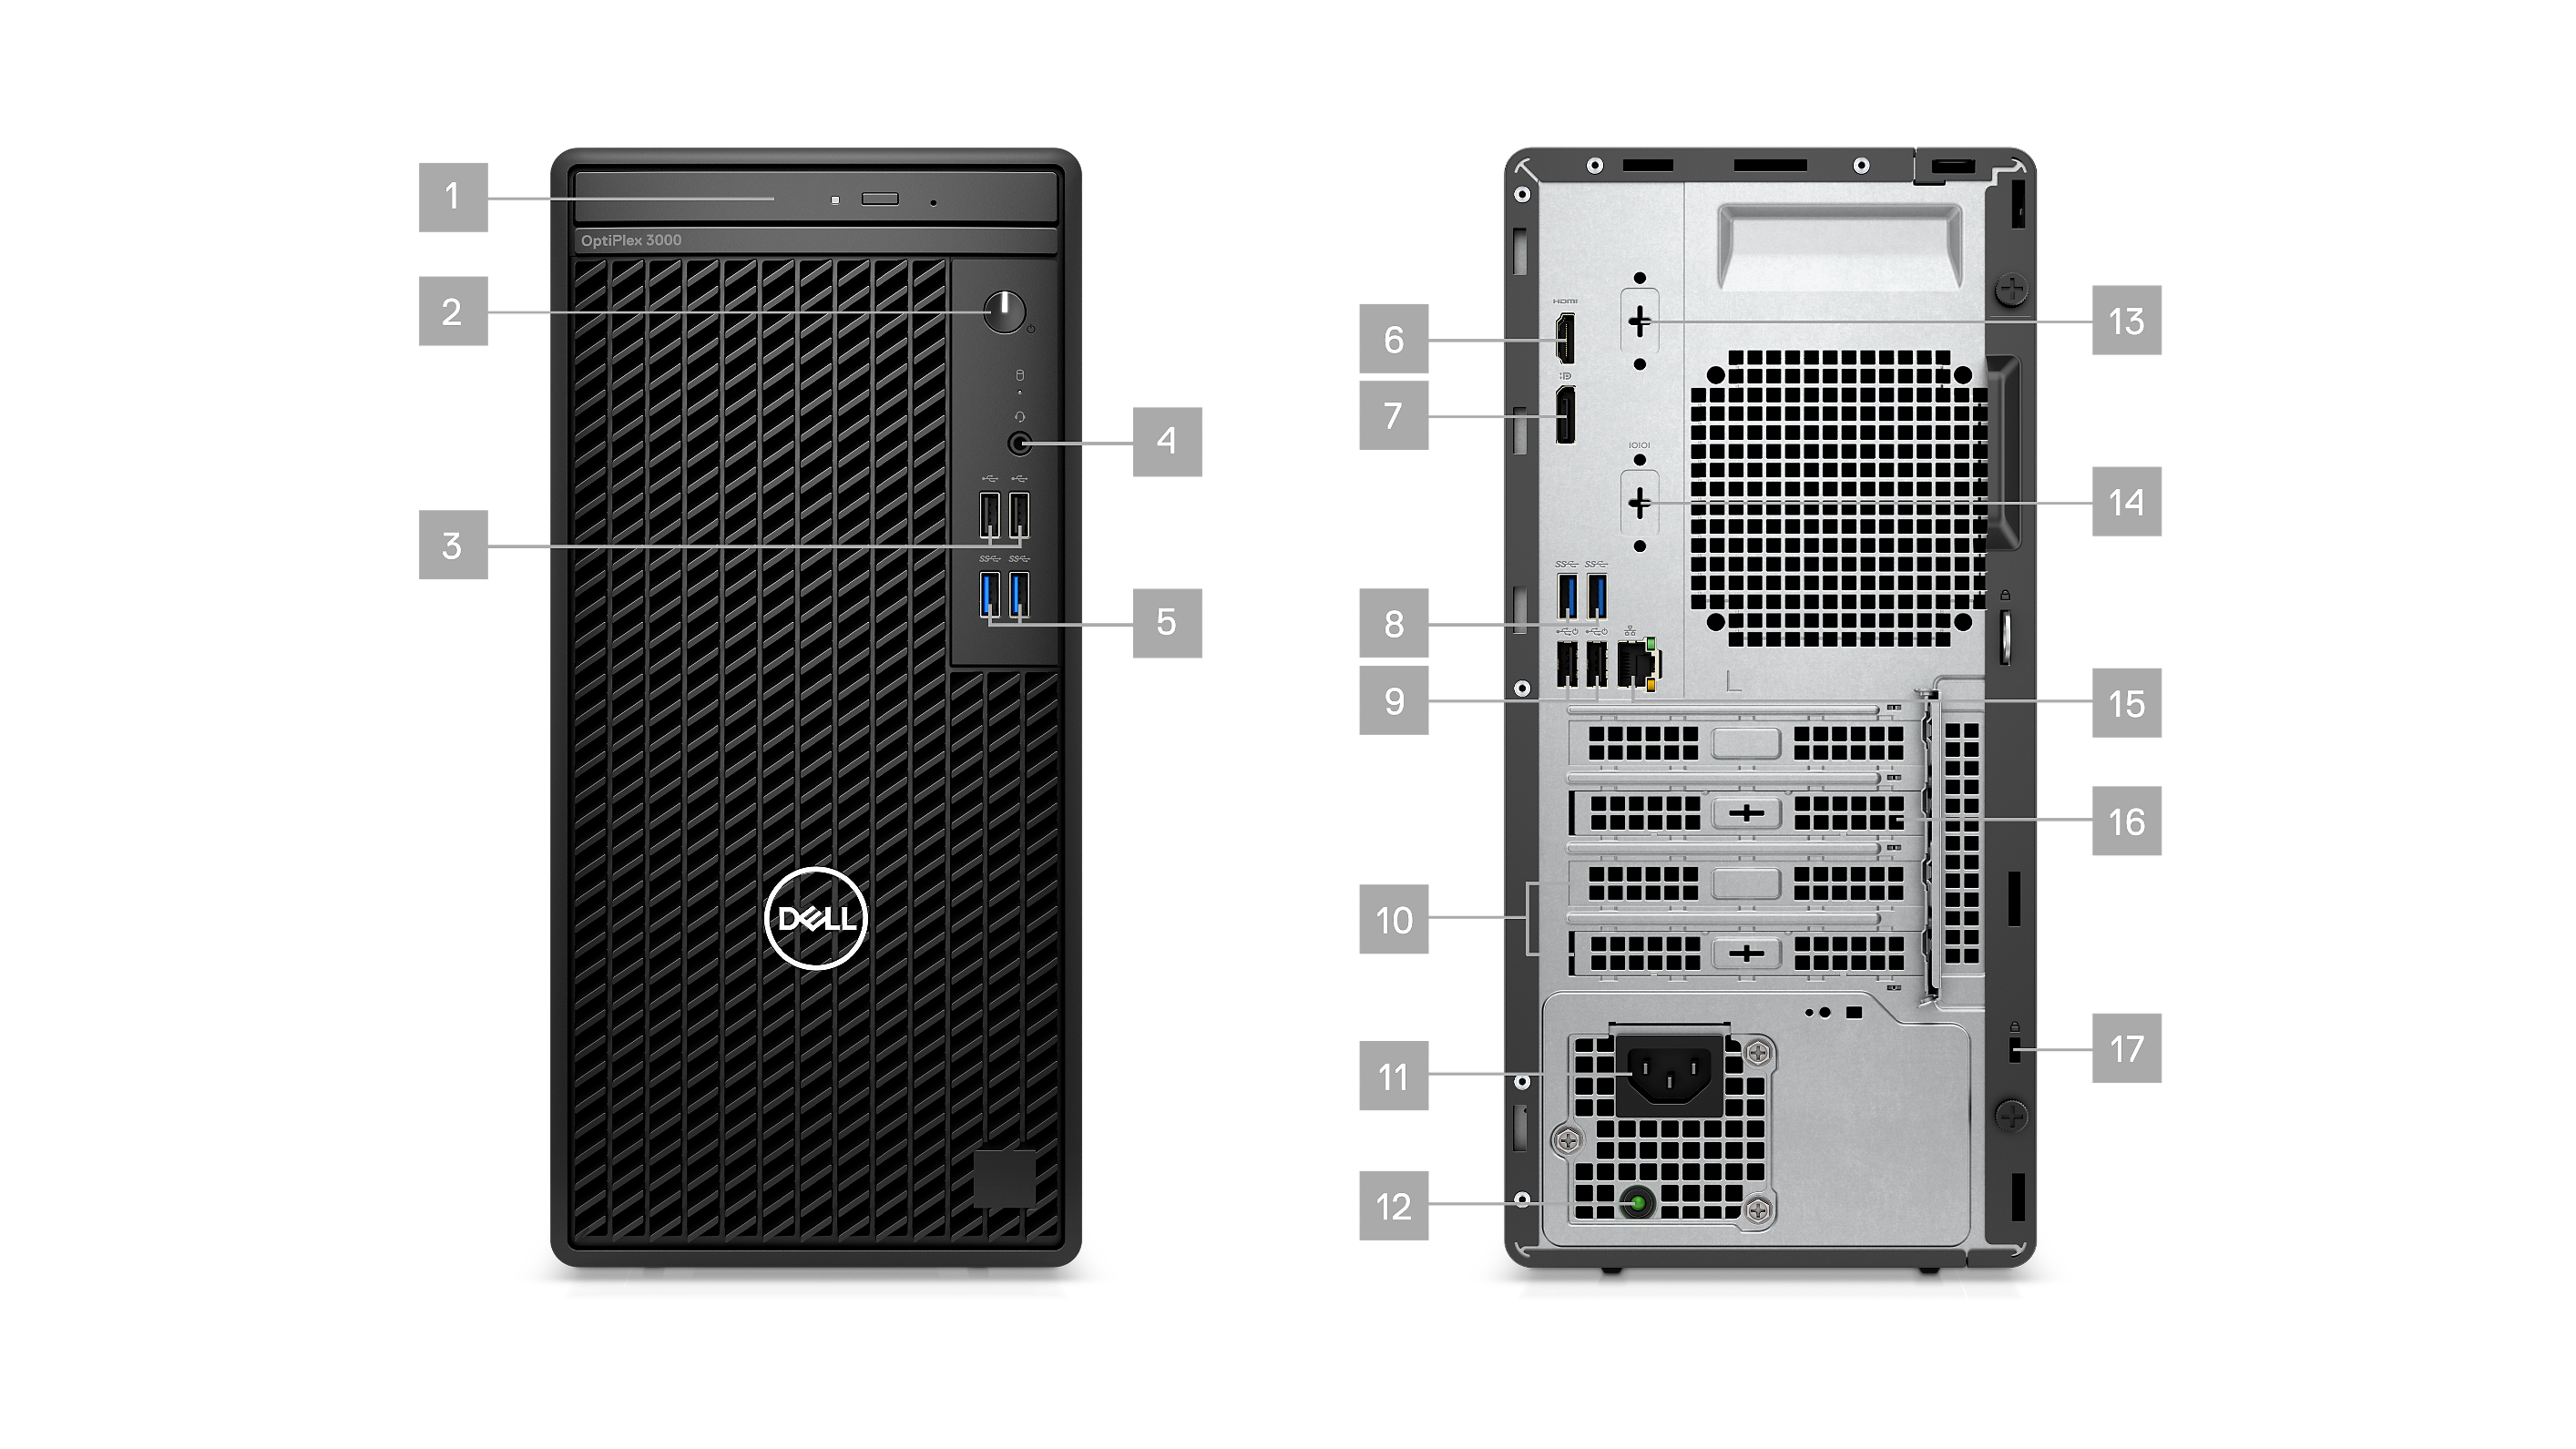 https://i.dell.com/is/image/DellContent/content/dam/ss2/products/desktops-and-all-in-ones/optiplex/3000-tsff/pdp/desktop-optiplex-3000-tsff-pdp-mod05.psd?wid=3840&hei=1591&fmt=png-alpha&qlt=90%2c0&op_usm=1.75%2c0.3%2c2%2c0&resMode=sharp&pscan=auto&fit=constrain%2c1&align=0%2c0